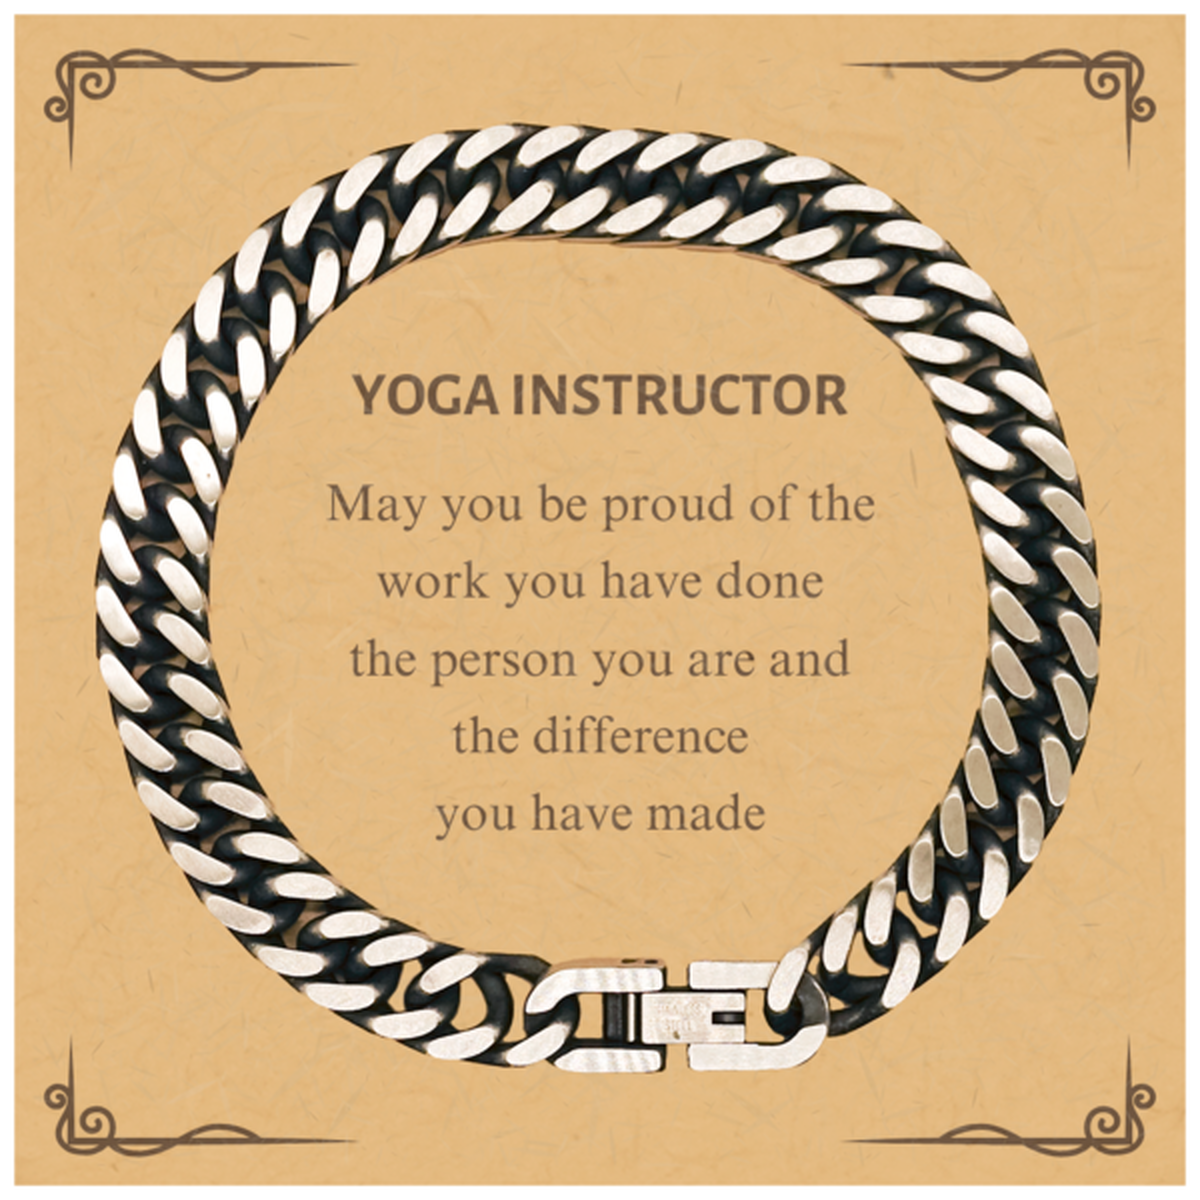 Yoga Instructor May you be proud of the work you have done, Retirement Yoga Instructor Cuban Link Chain Bracelet for Colleague Appreciation Gifts Amazing for Yoga Instructor